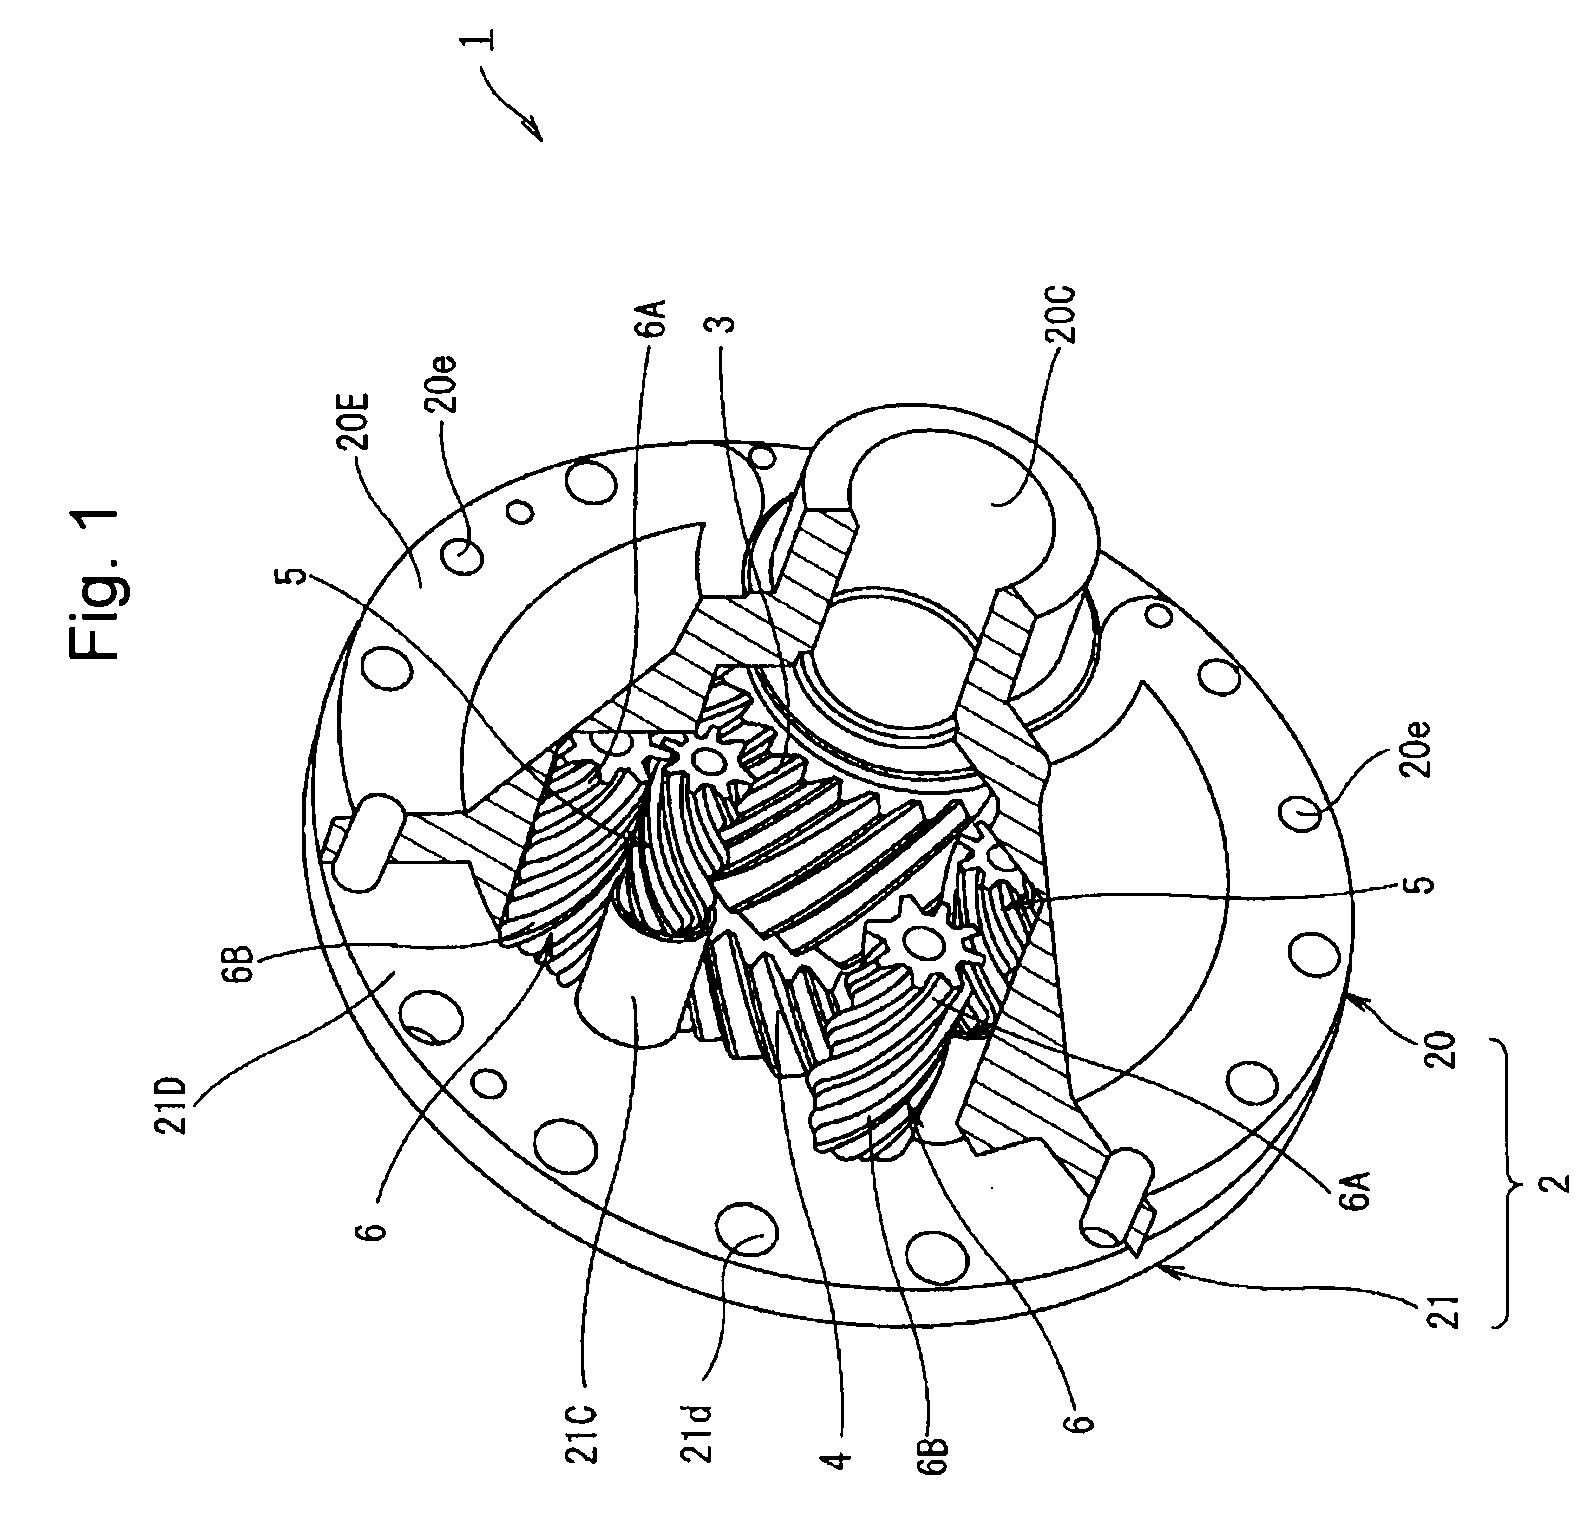 Gear and differential apparatus provided therewith for vehicle